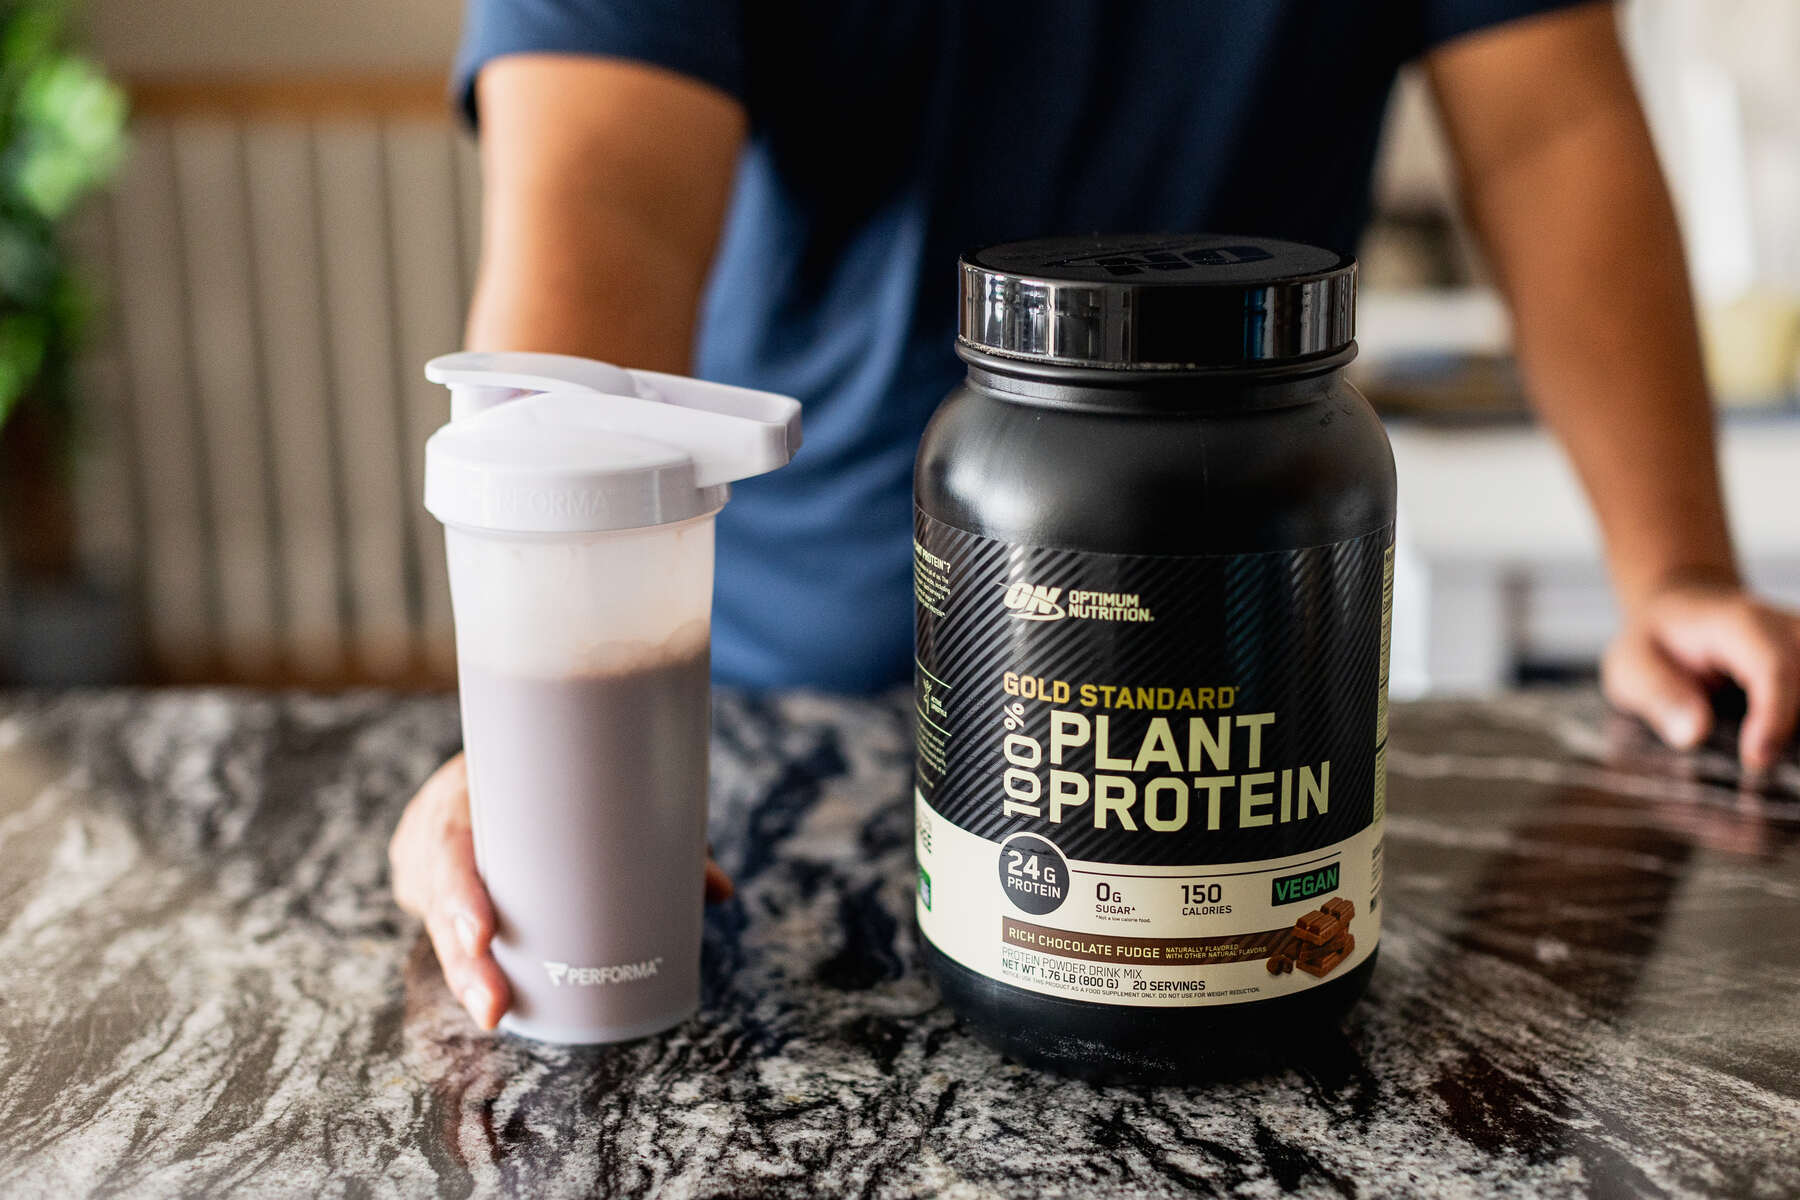 A person in a blue shirt holding a white protein shaker with a black container of Optimum Nutrition Gold Standard Plant Protein on a marbled countertop